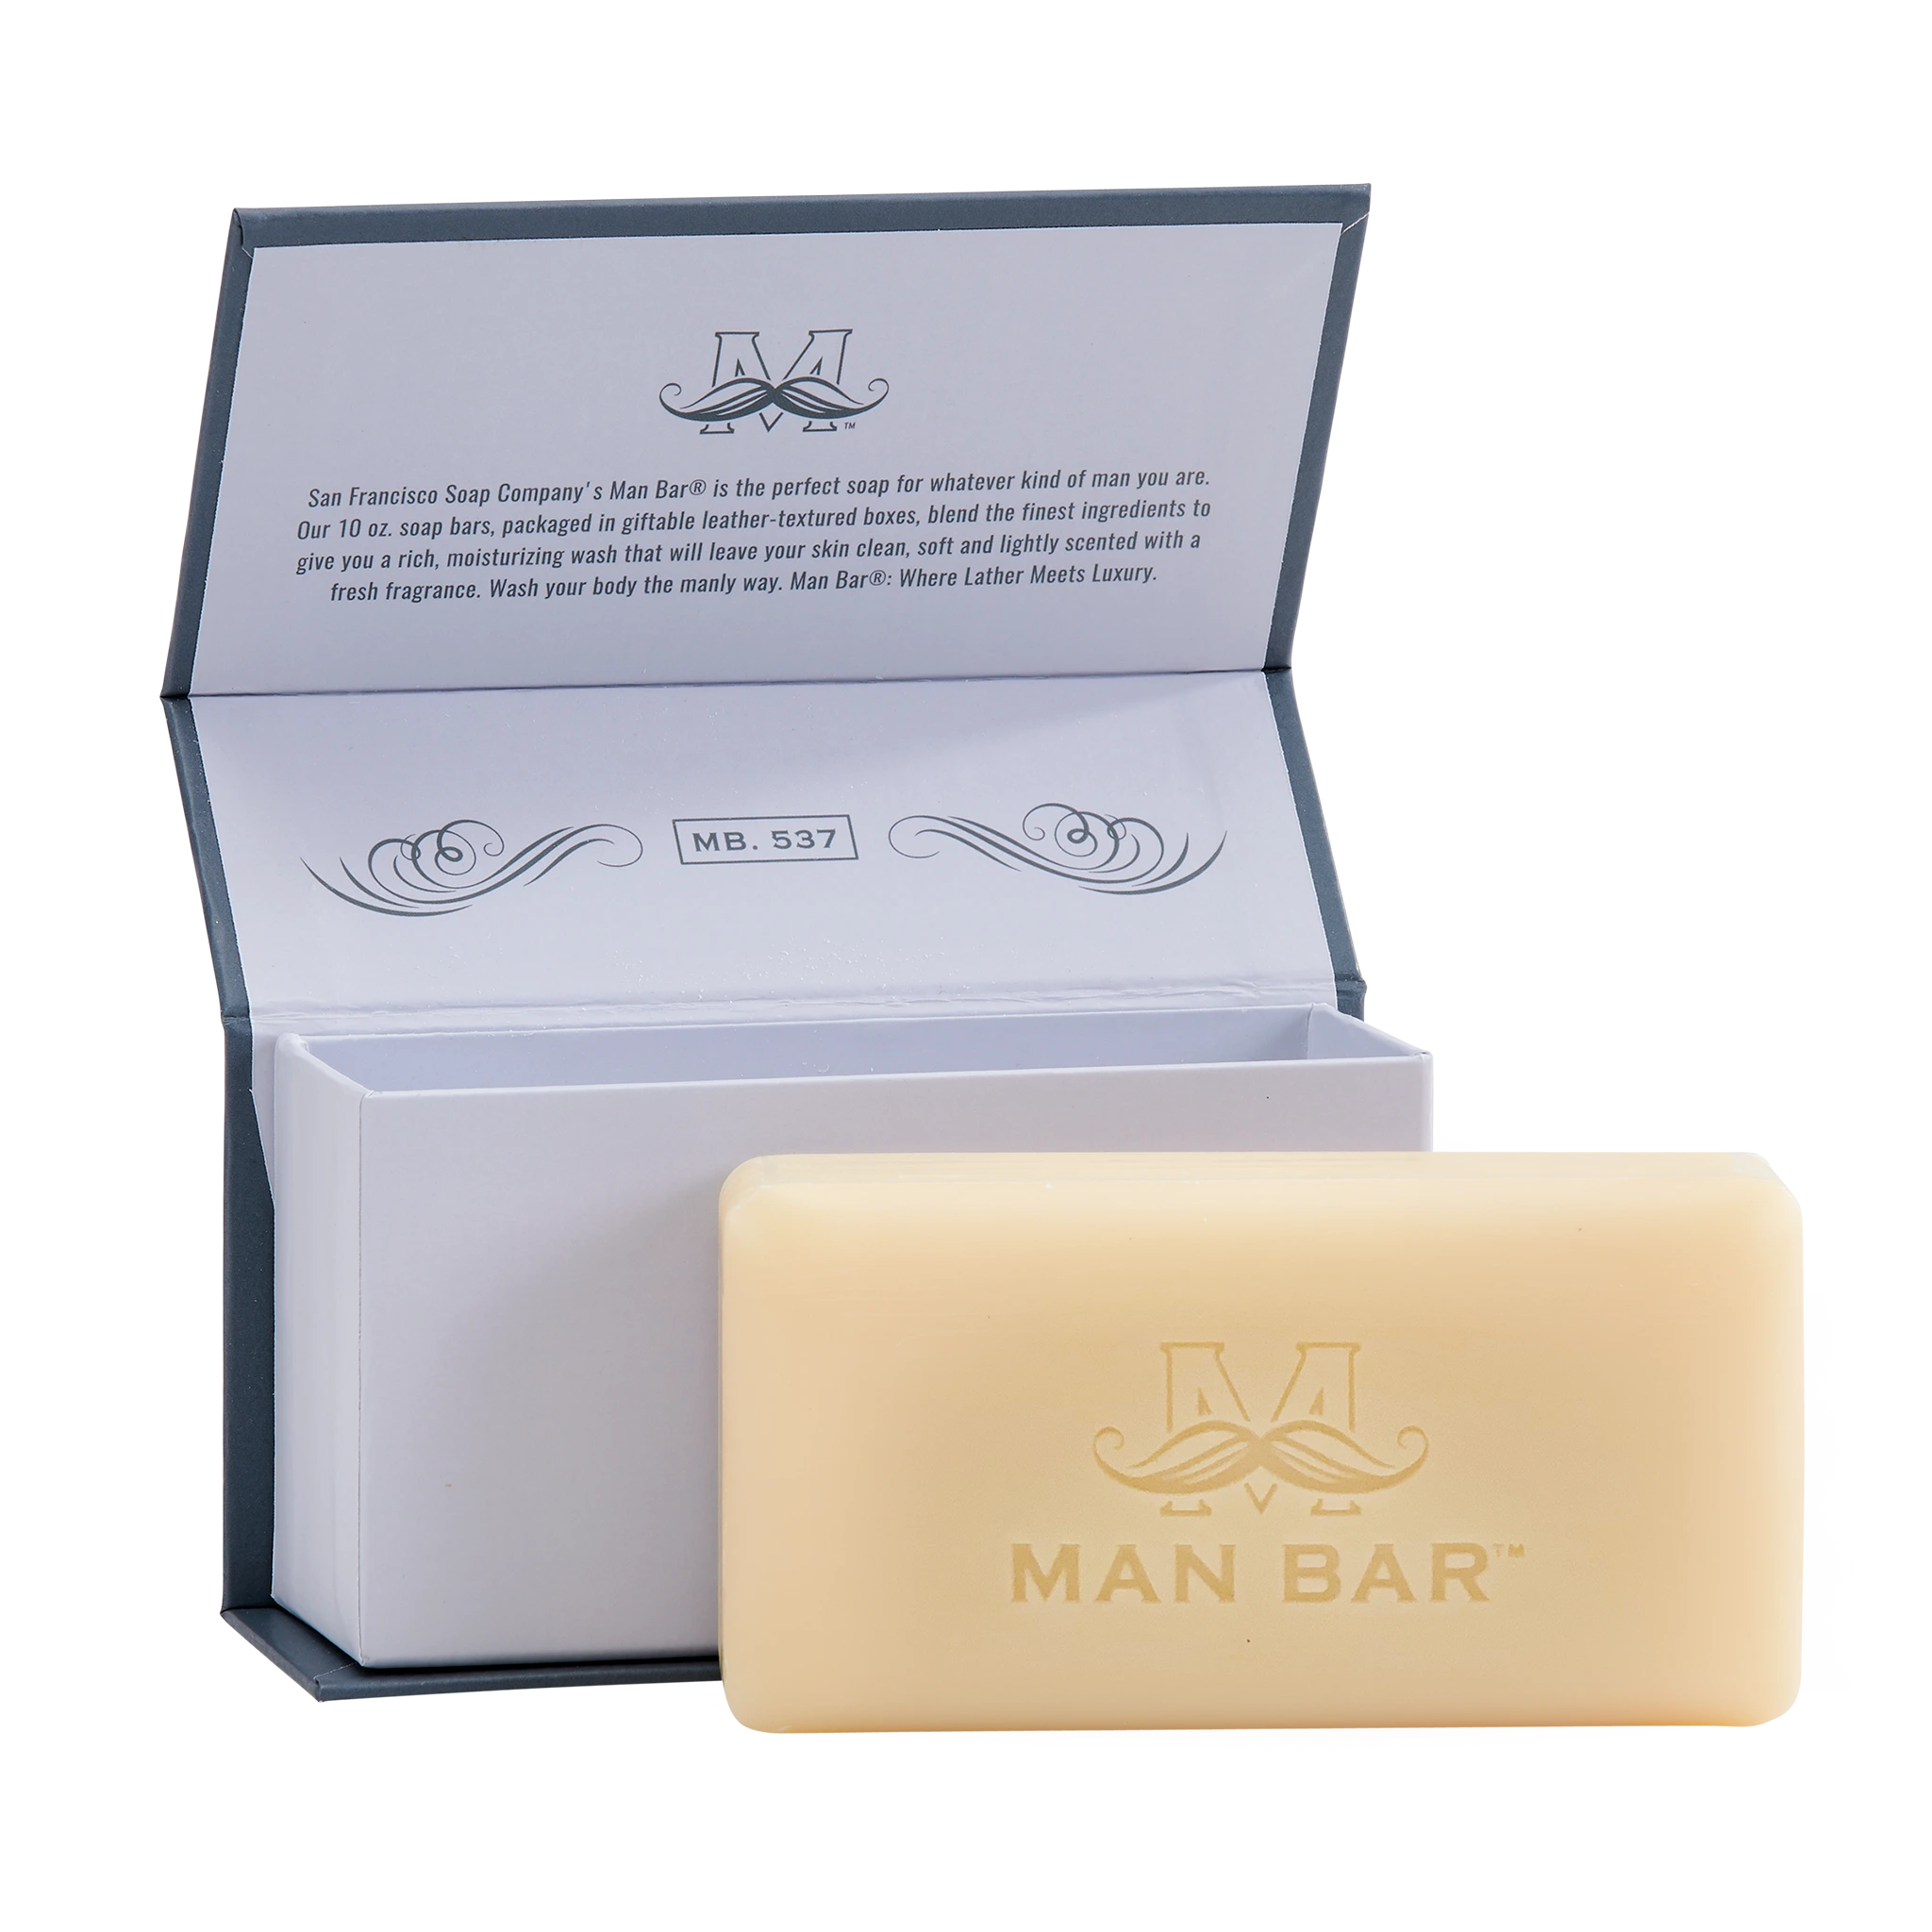 Man Bar Refreshing Peppered Patchouli, open view of box